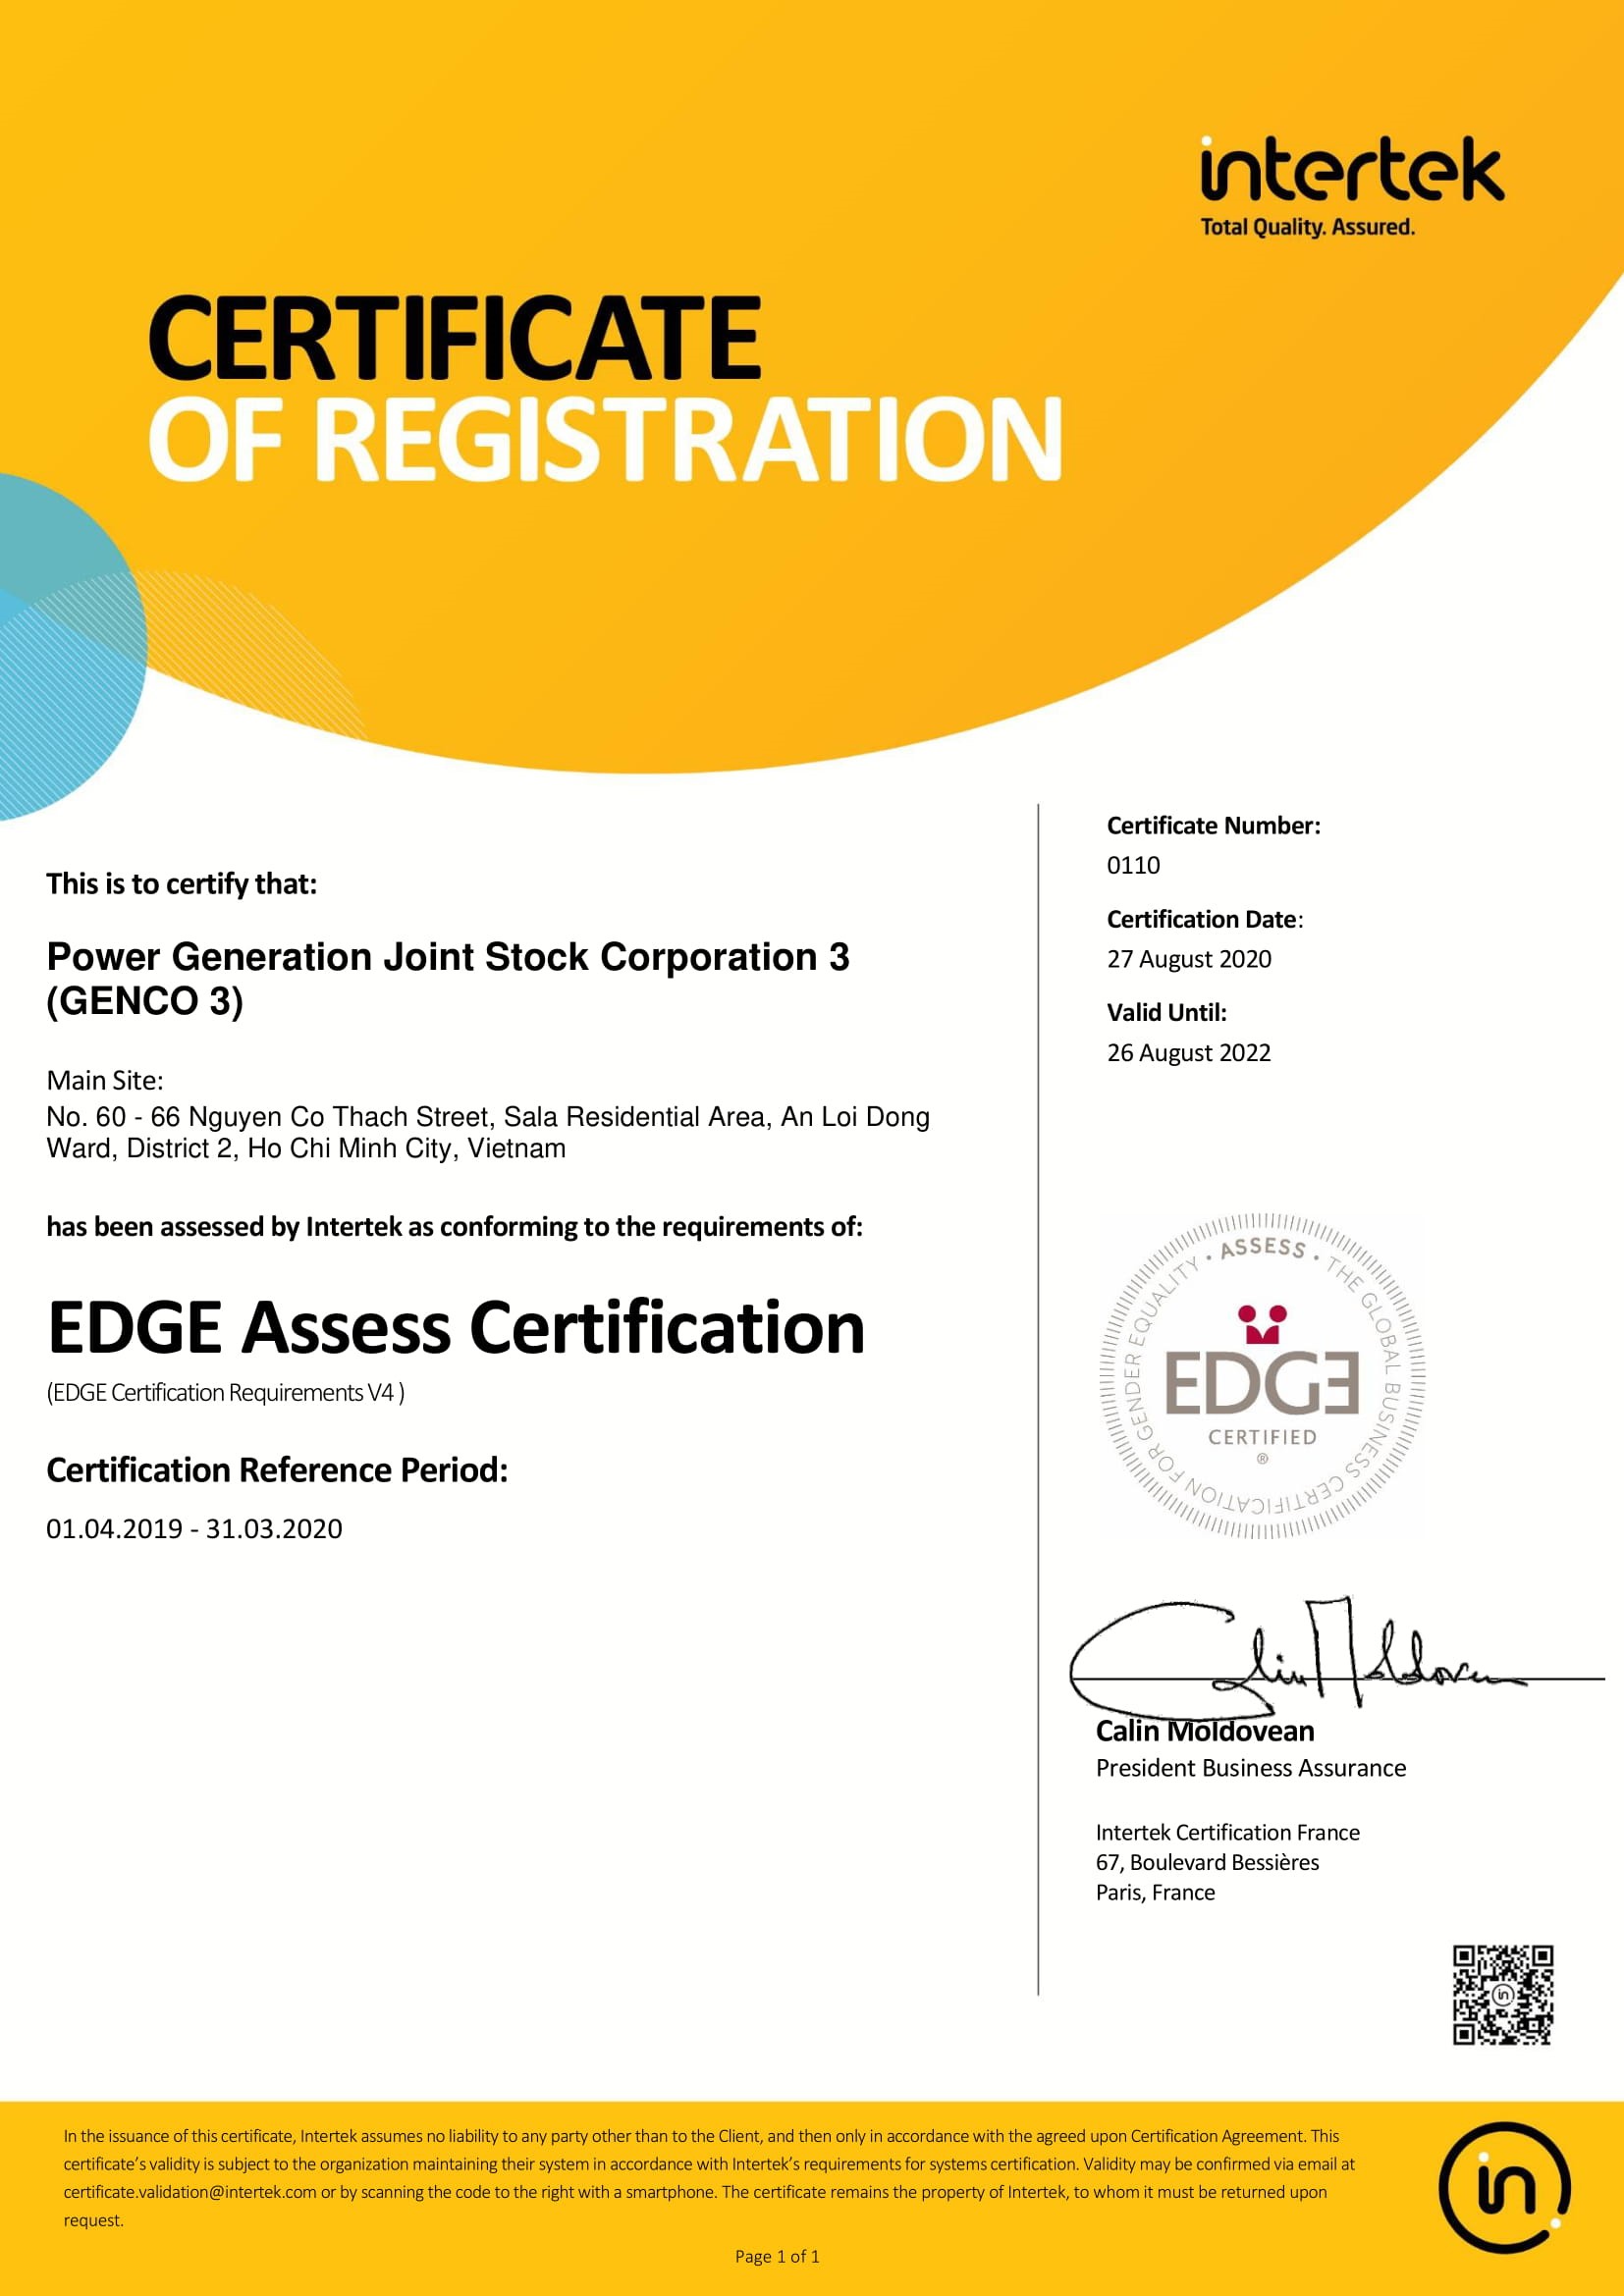 Power Generation Corporation 3 received the EDGE Certification on Global Gender Equality